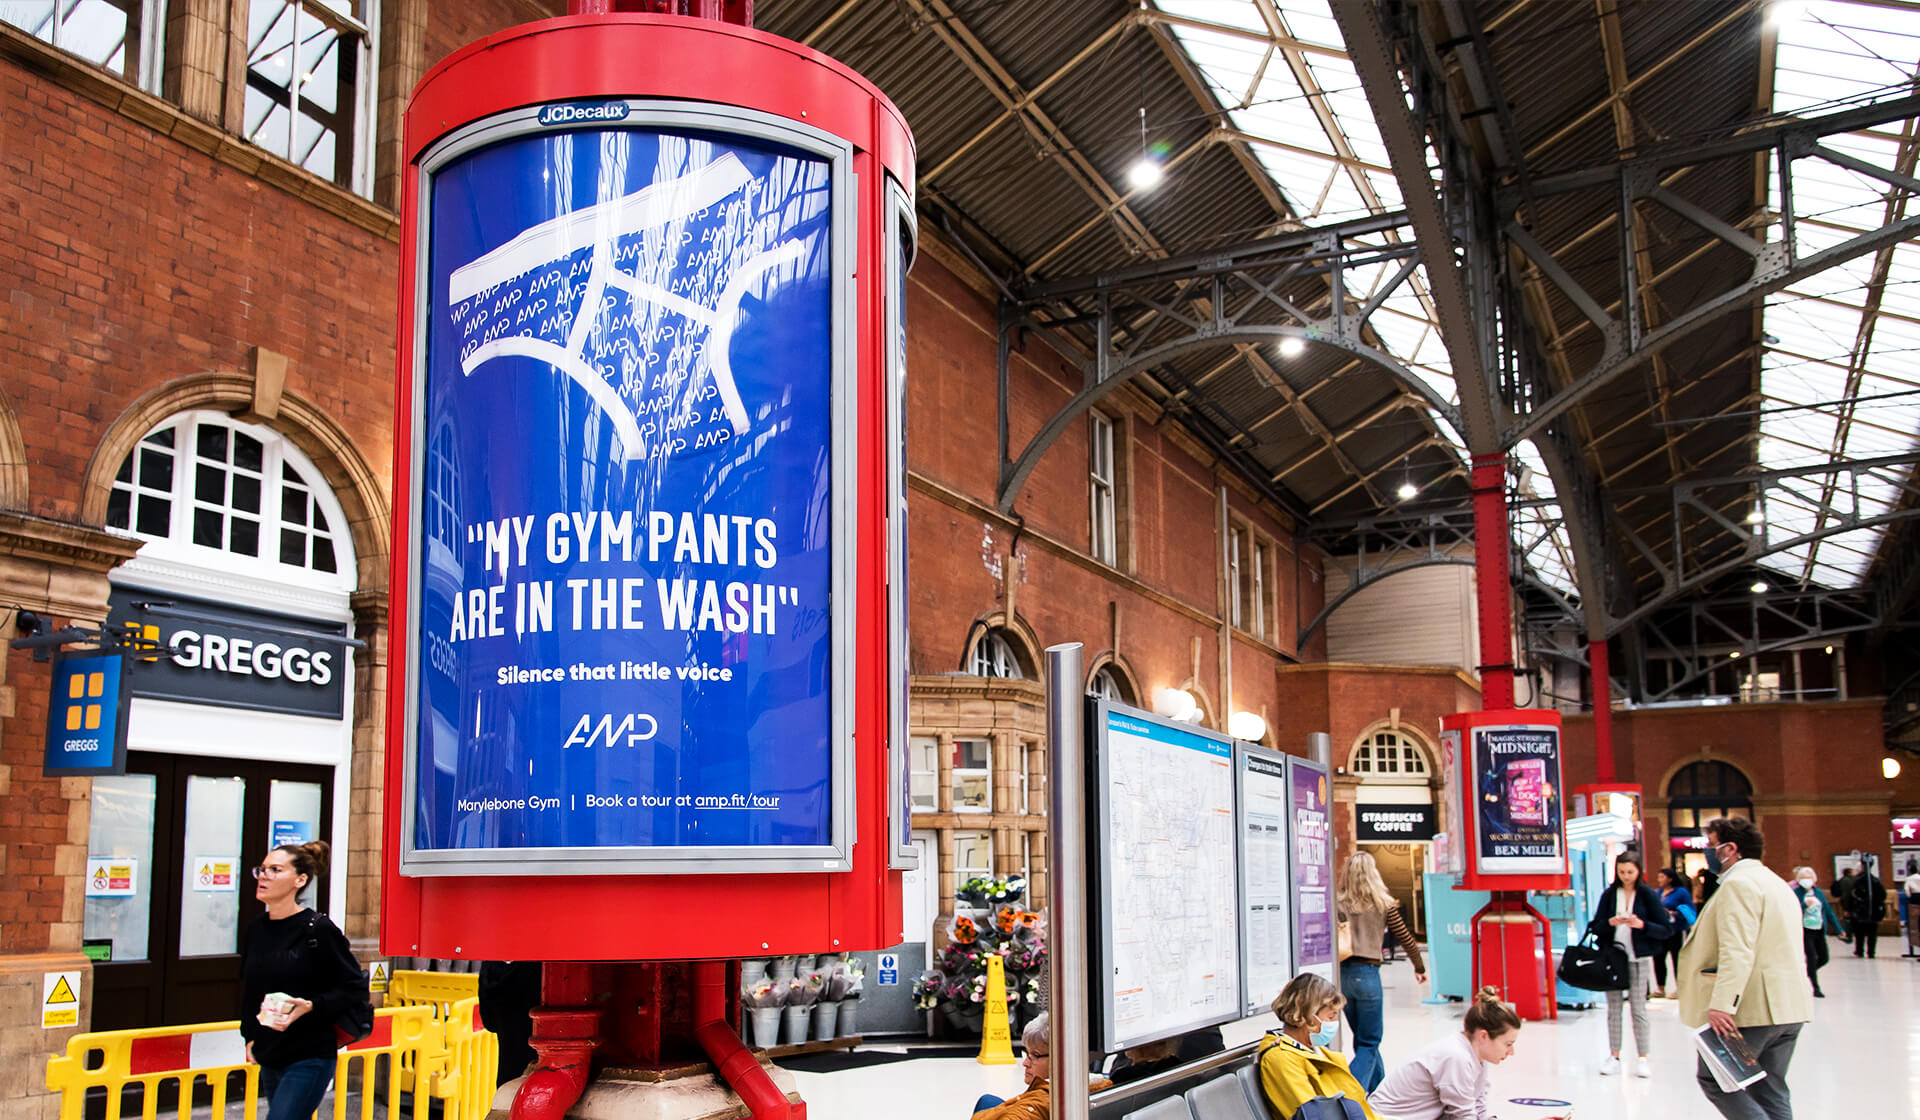 AMP Athletic Gym - Ad Campaign by Mellor&Smith - Paul Mellor